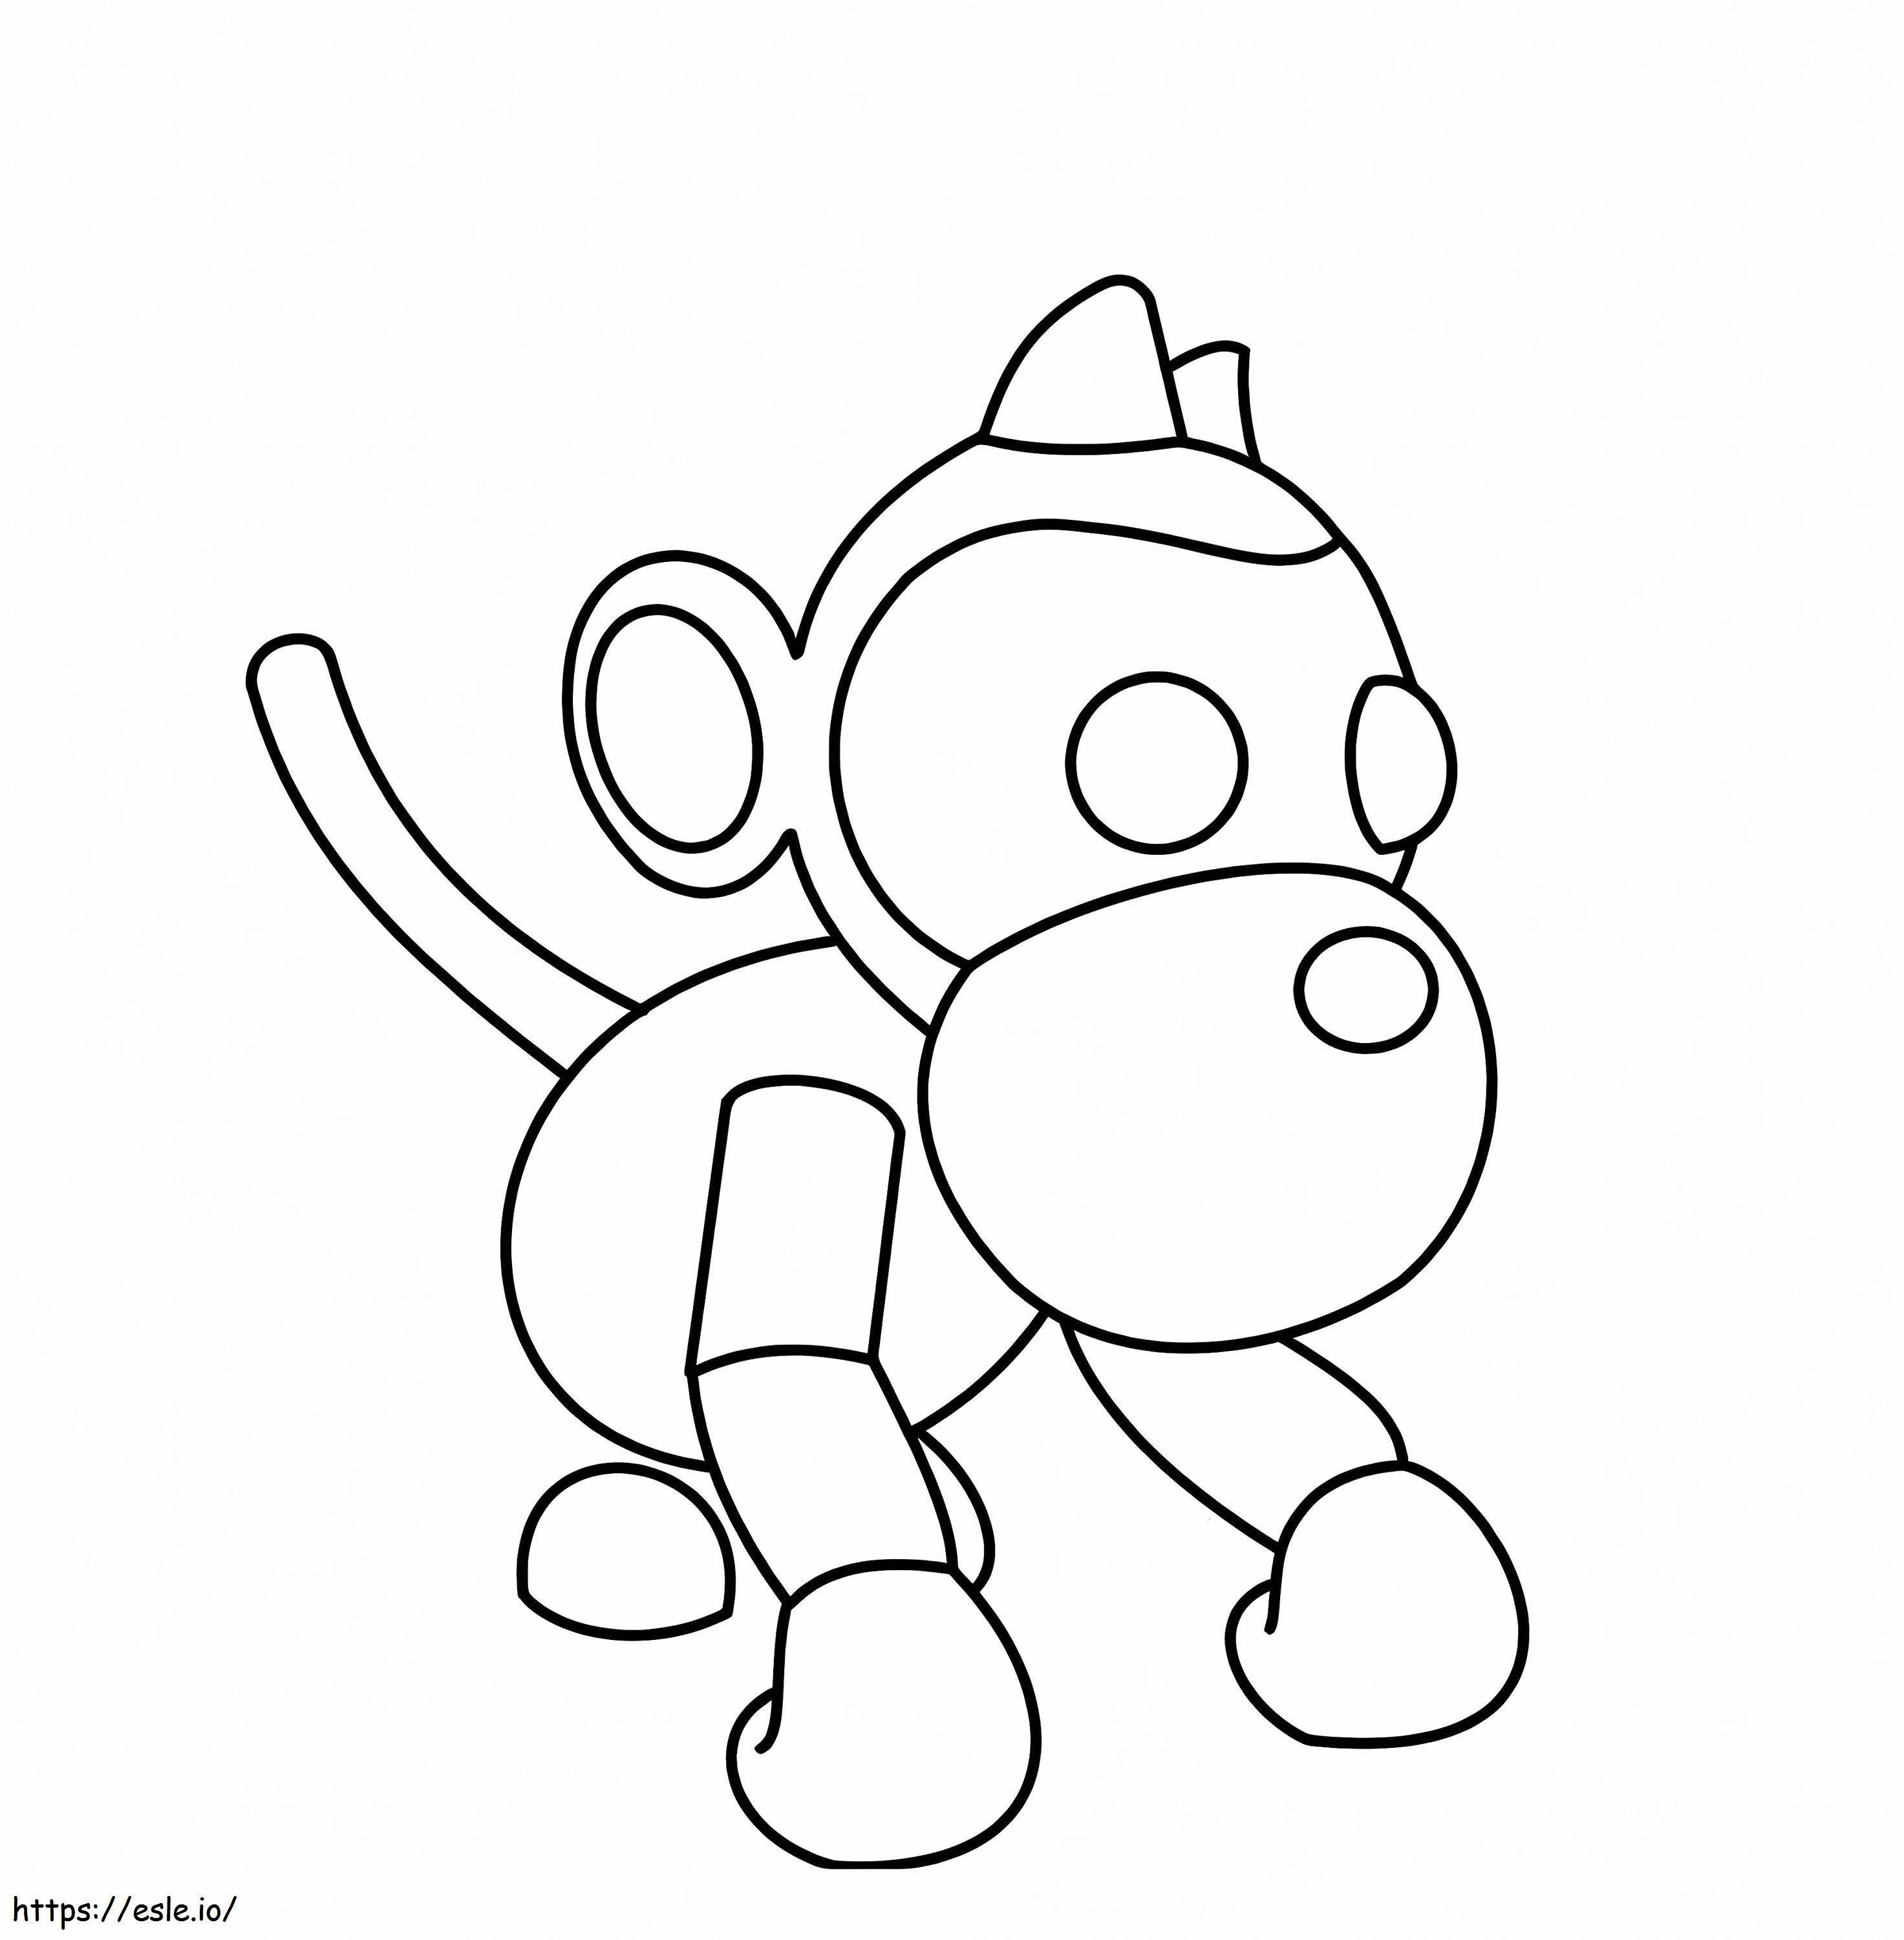 Monkey Adopt Me coloring page